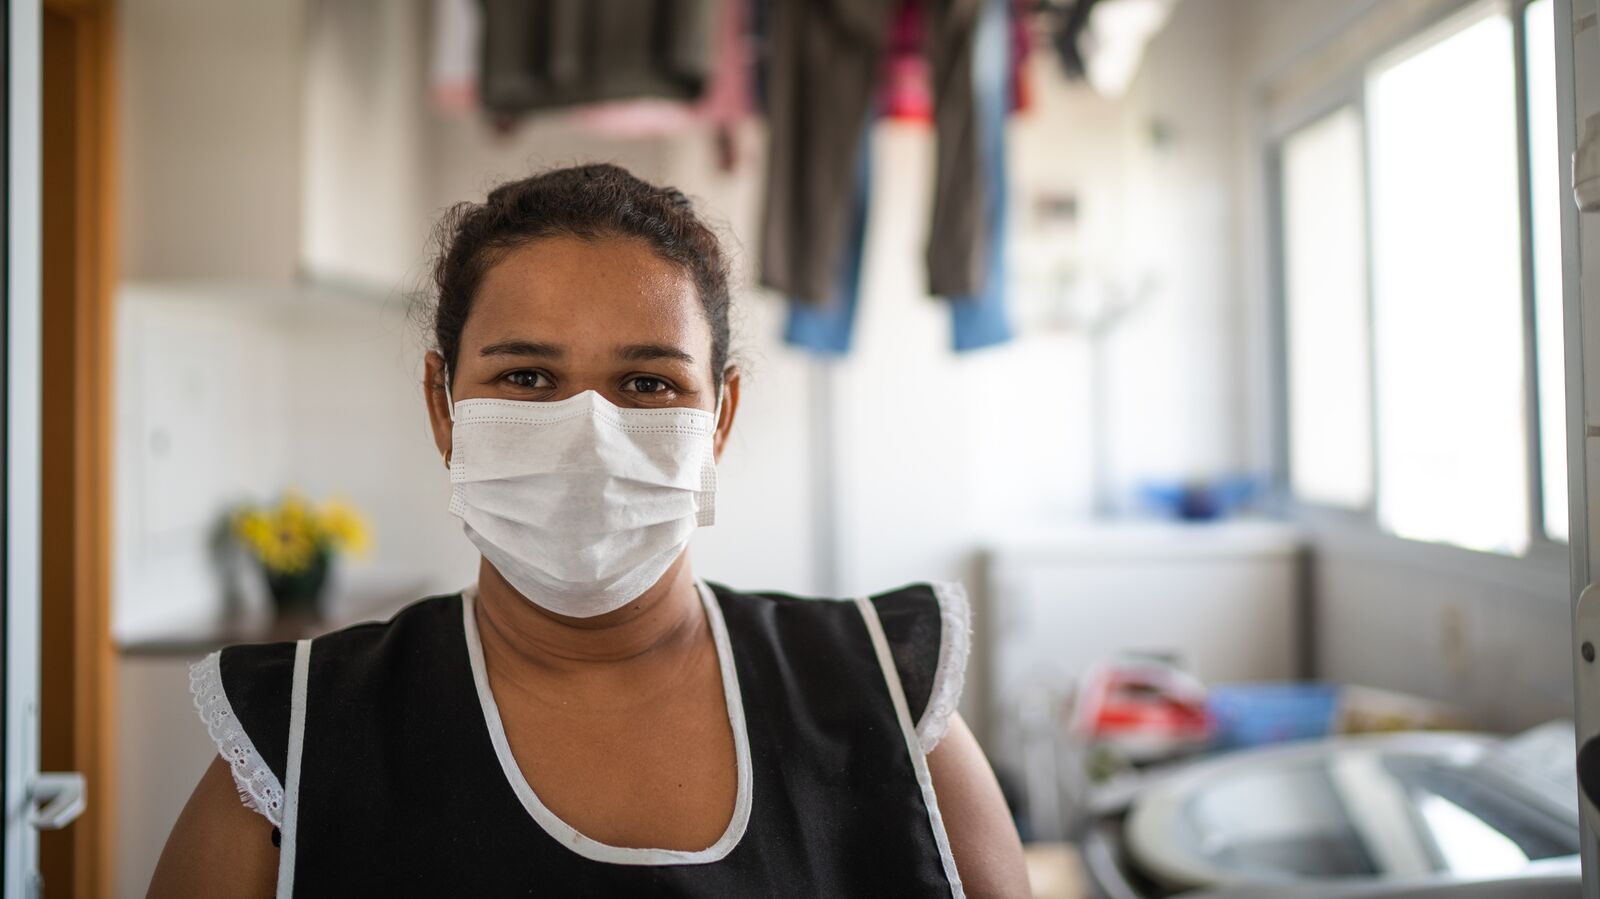 An essential worker stands in a laundry room wearing a mask